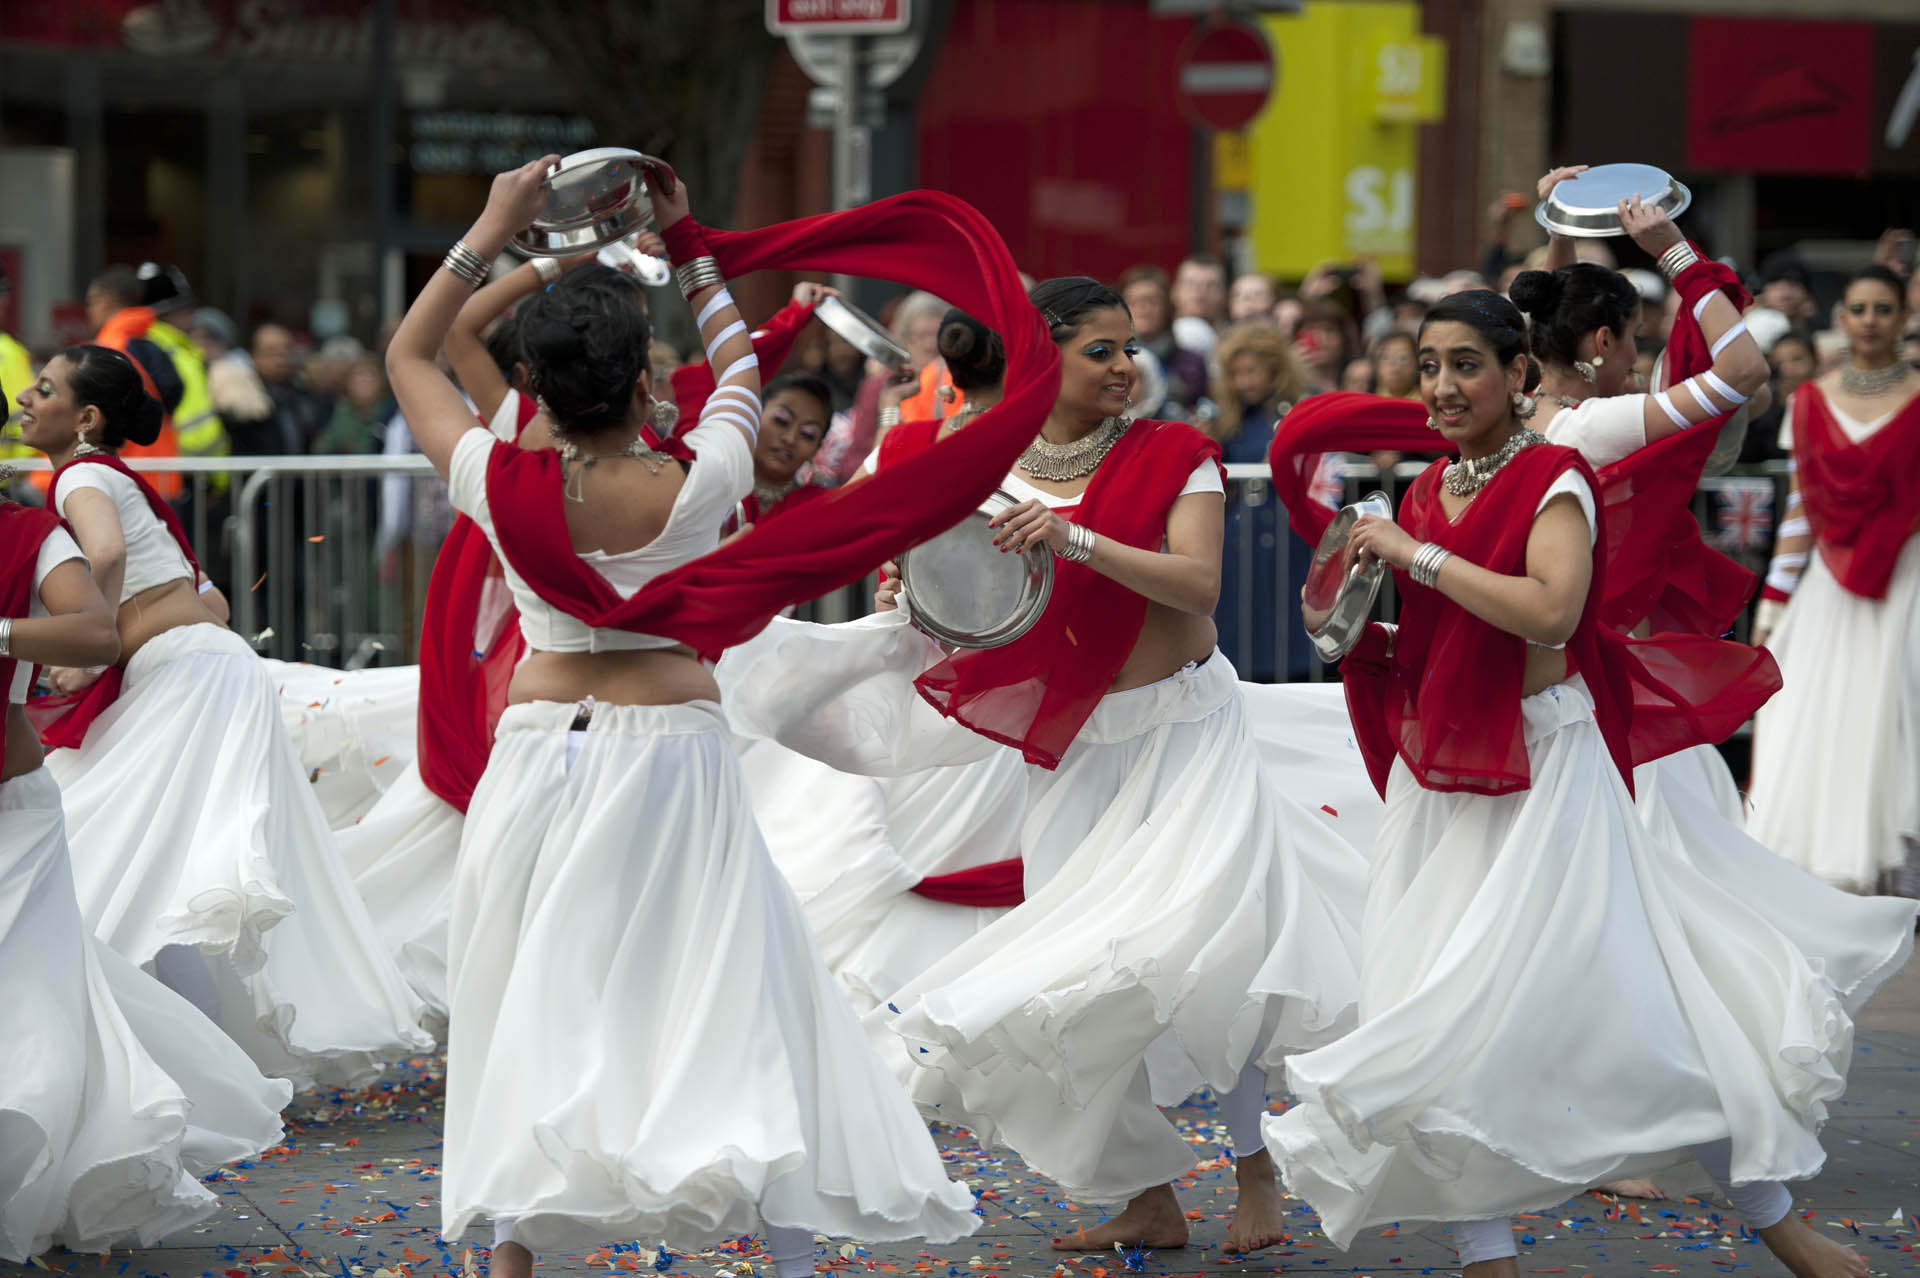 Performers at The Queen’s Diamond Jubilee celebrations in Leicester, 2012 - 